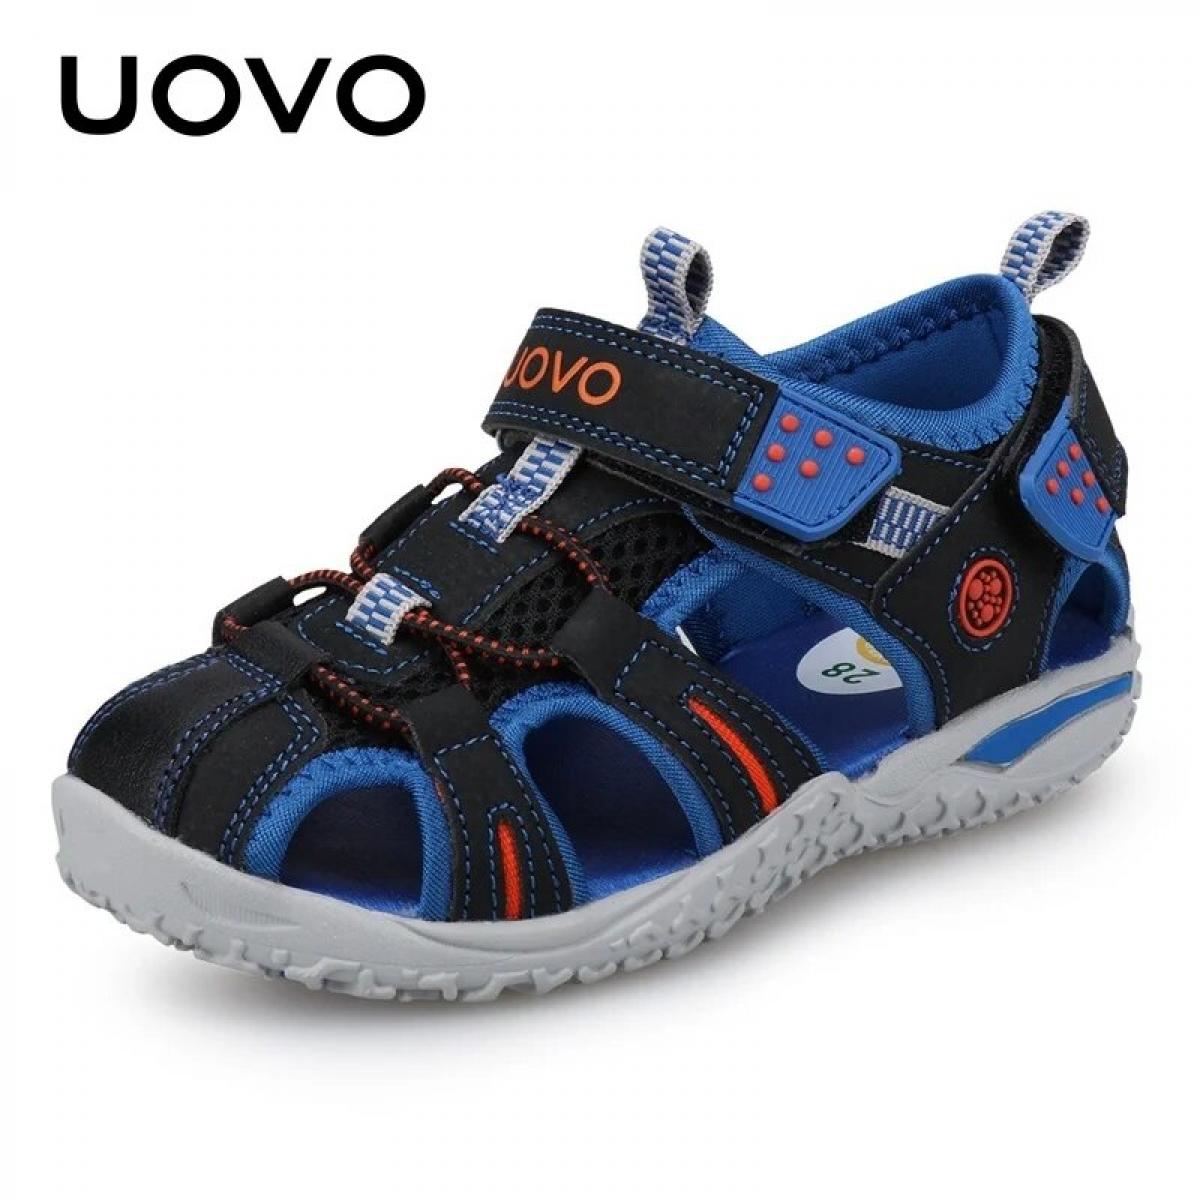 Closed Toe Toddler Boy Sandal  Kids Shoes Sandals Closed Toe  New Arrival Summer  